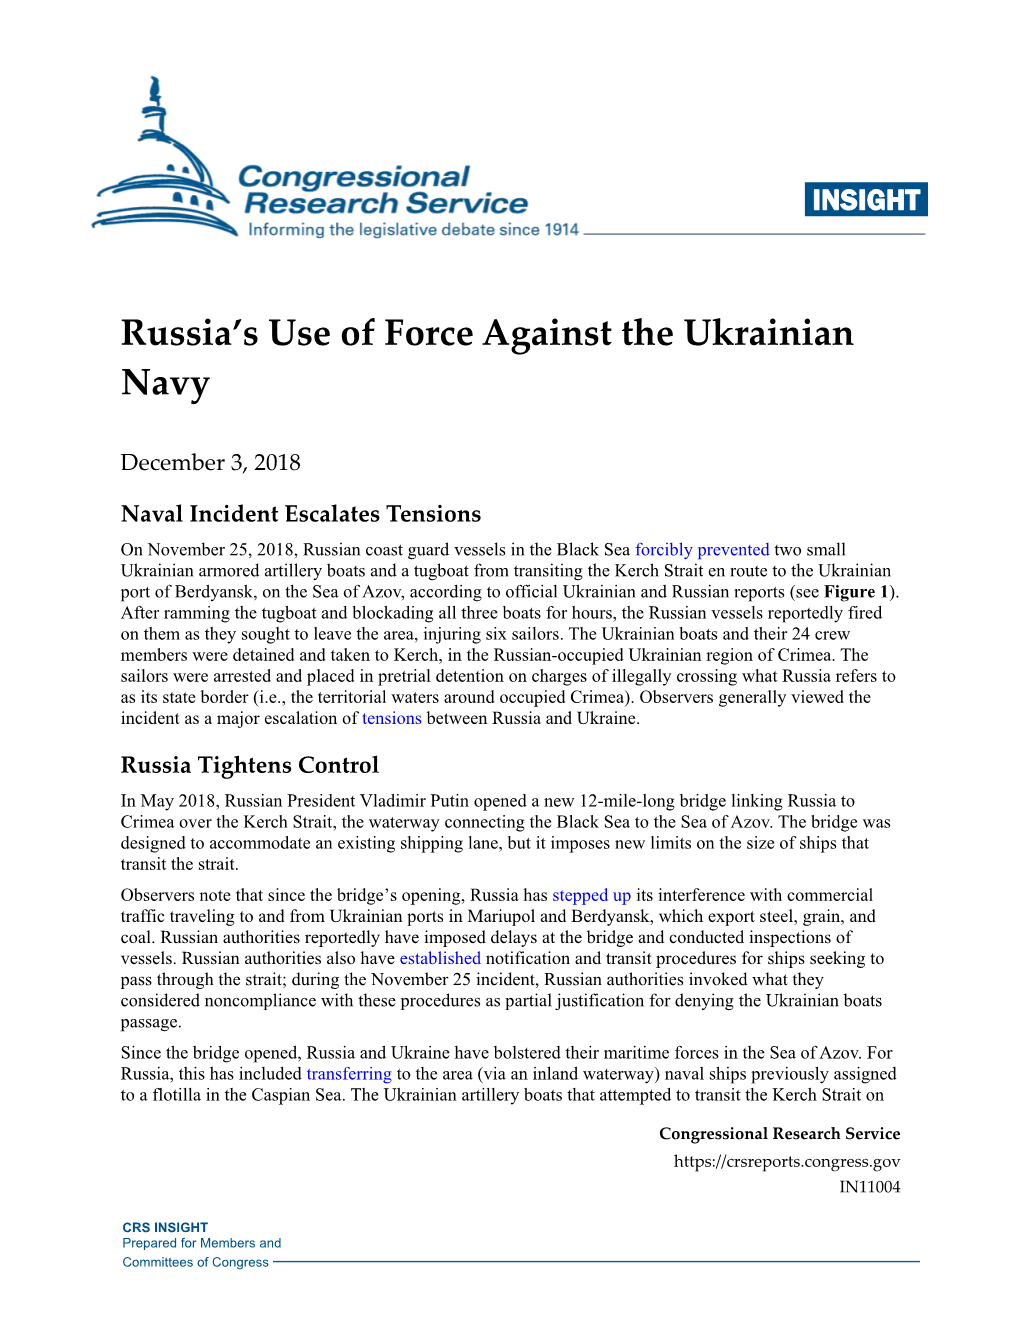 Russia's Use of Force Against the Ukrainian Navy